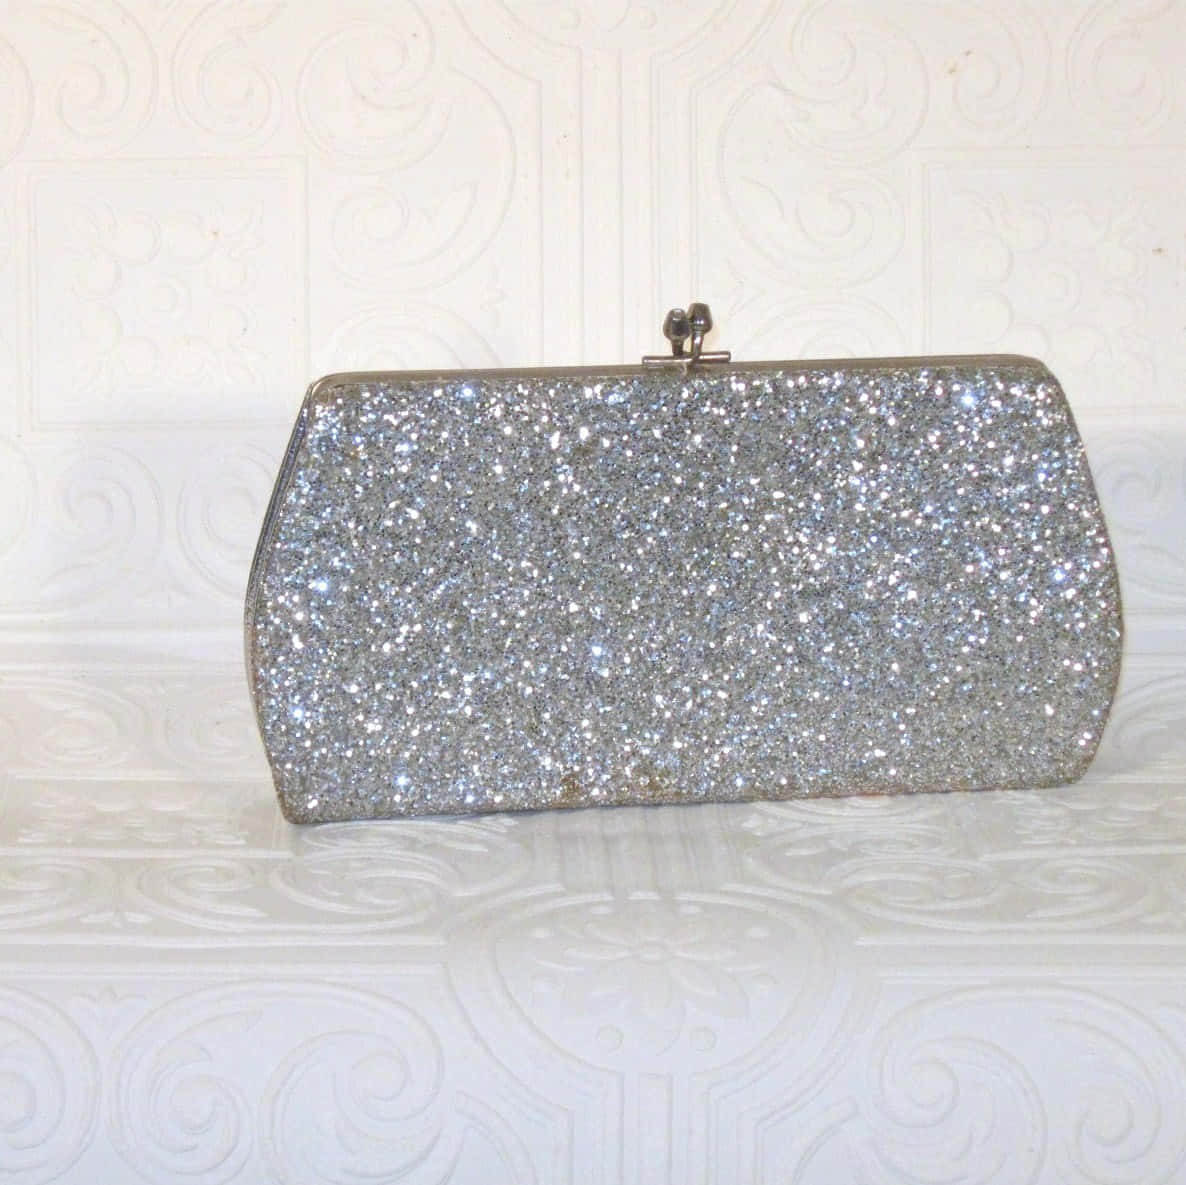 A Silver Glitter Clutch Bag On A White Table